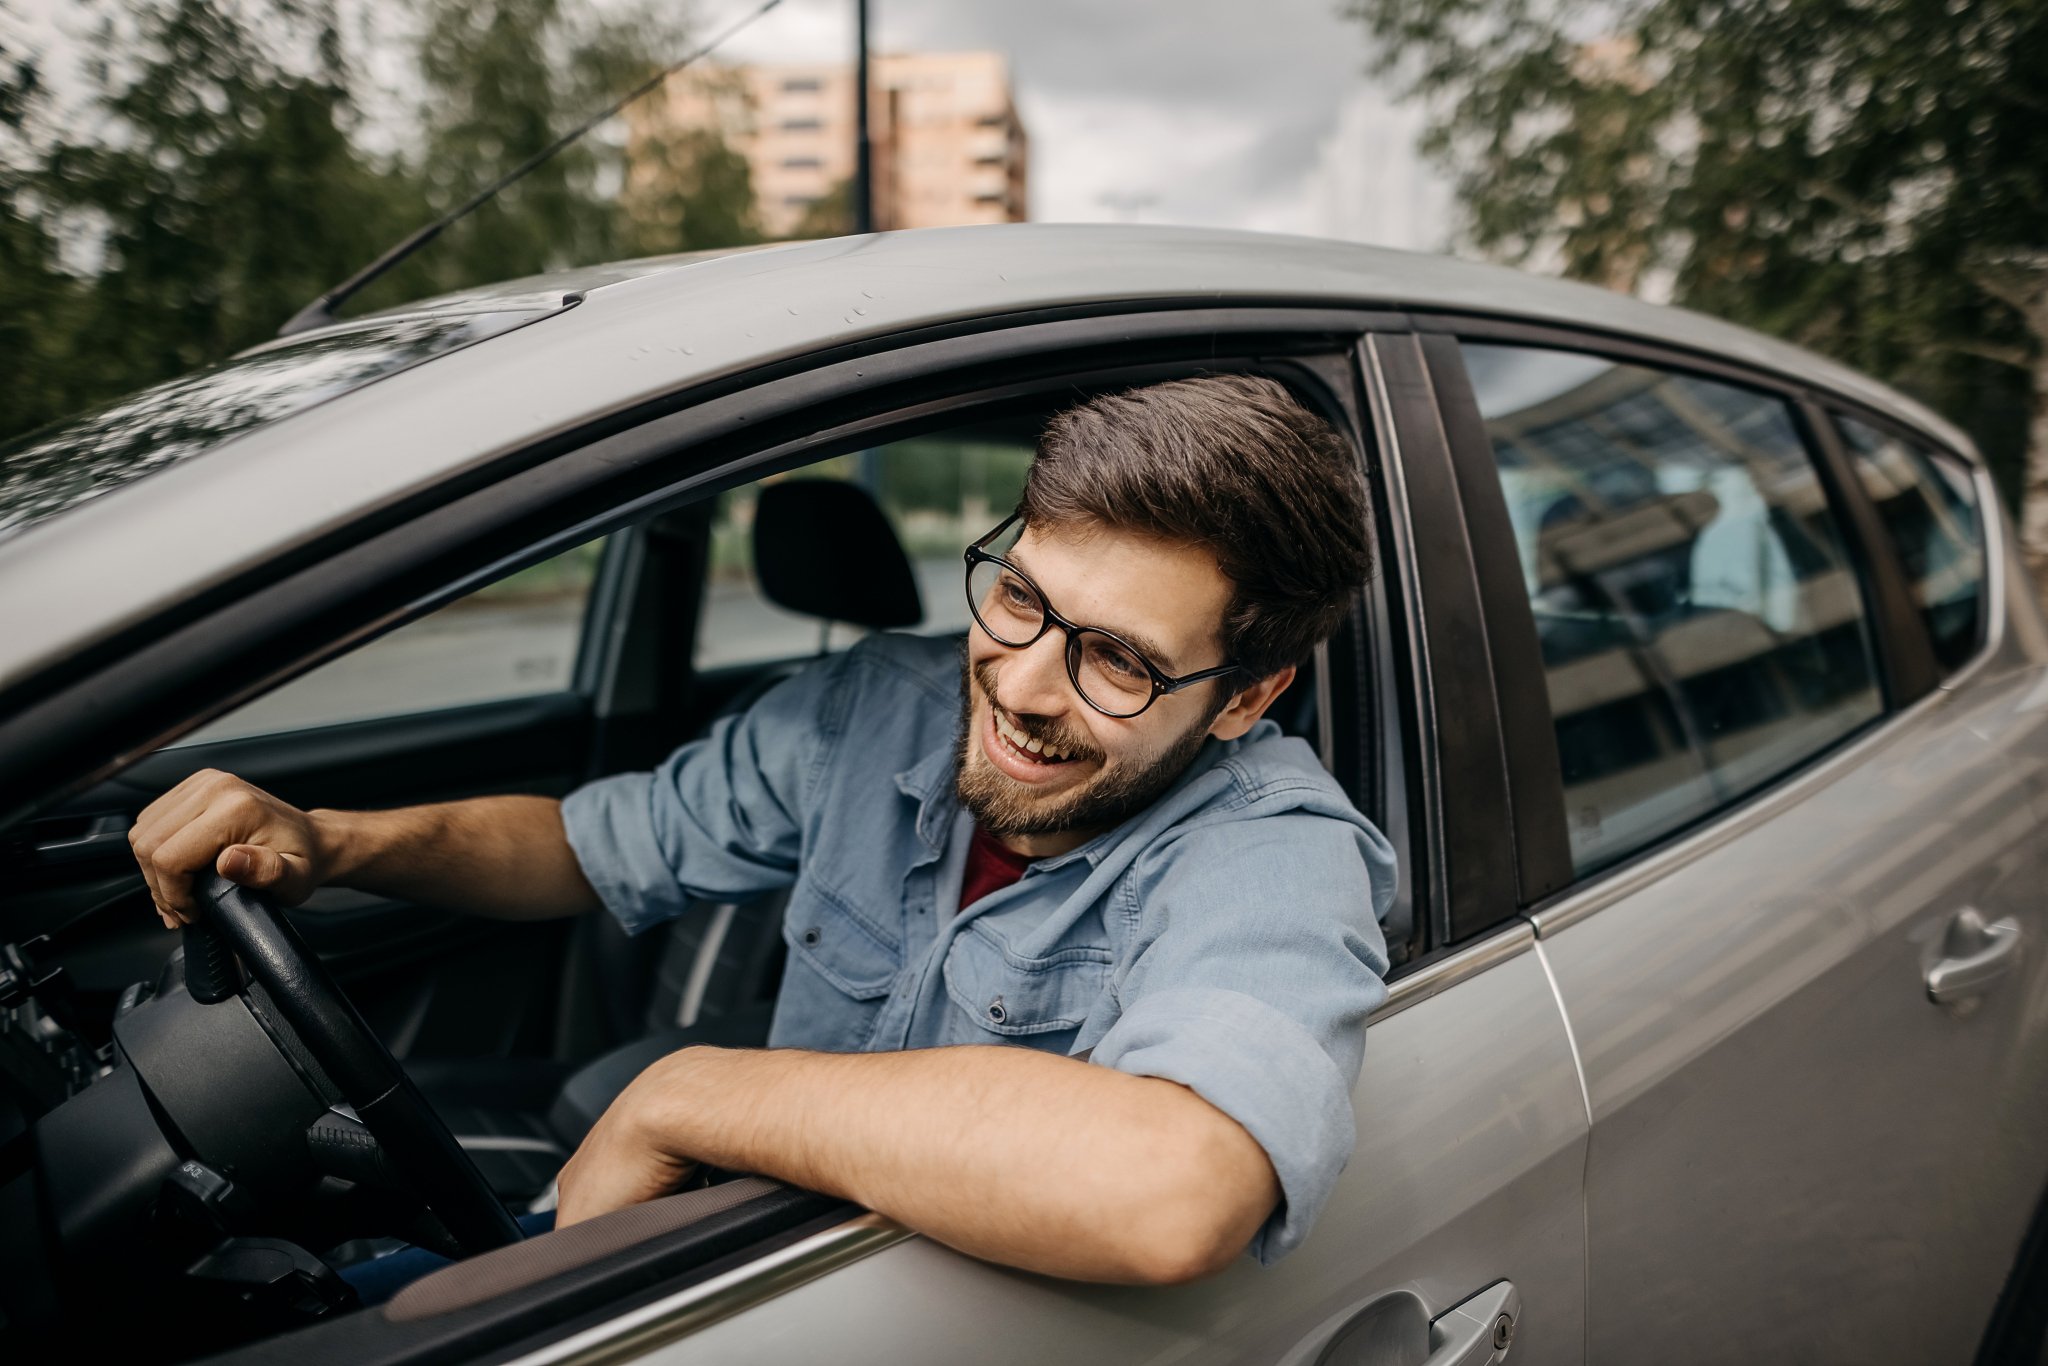 A man smiles as he leans out of his car window